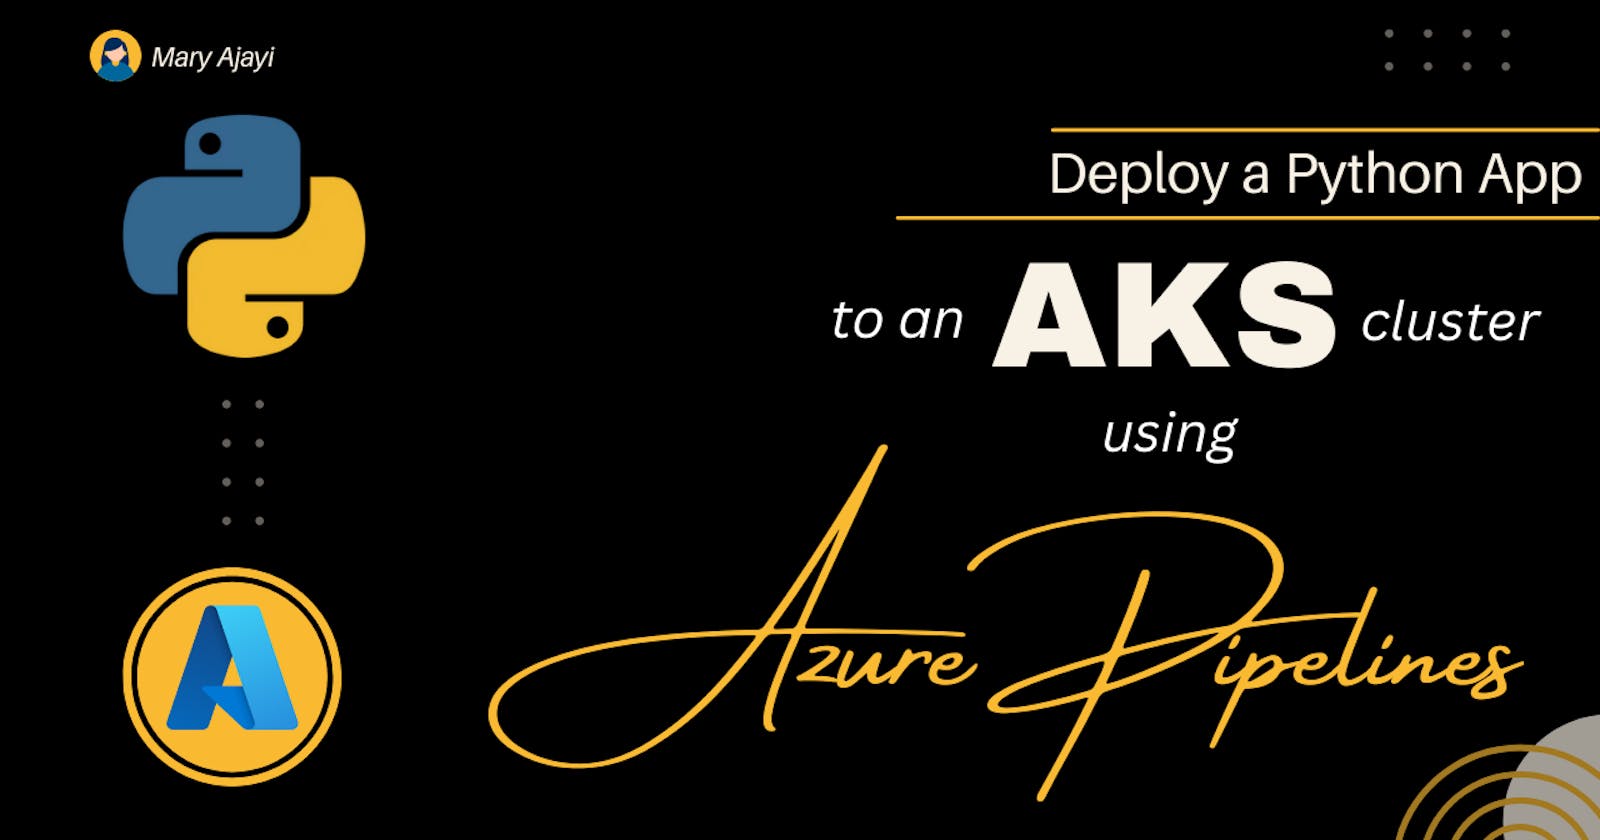 Deploying a Python App to an AKS Cluster Using Azure Pipelines